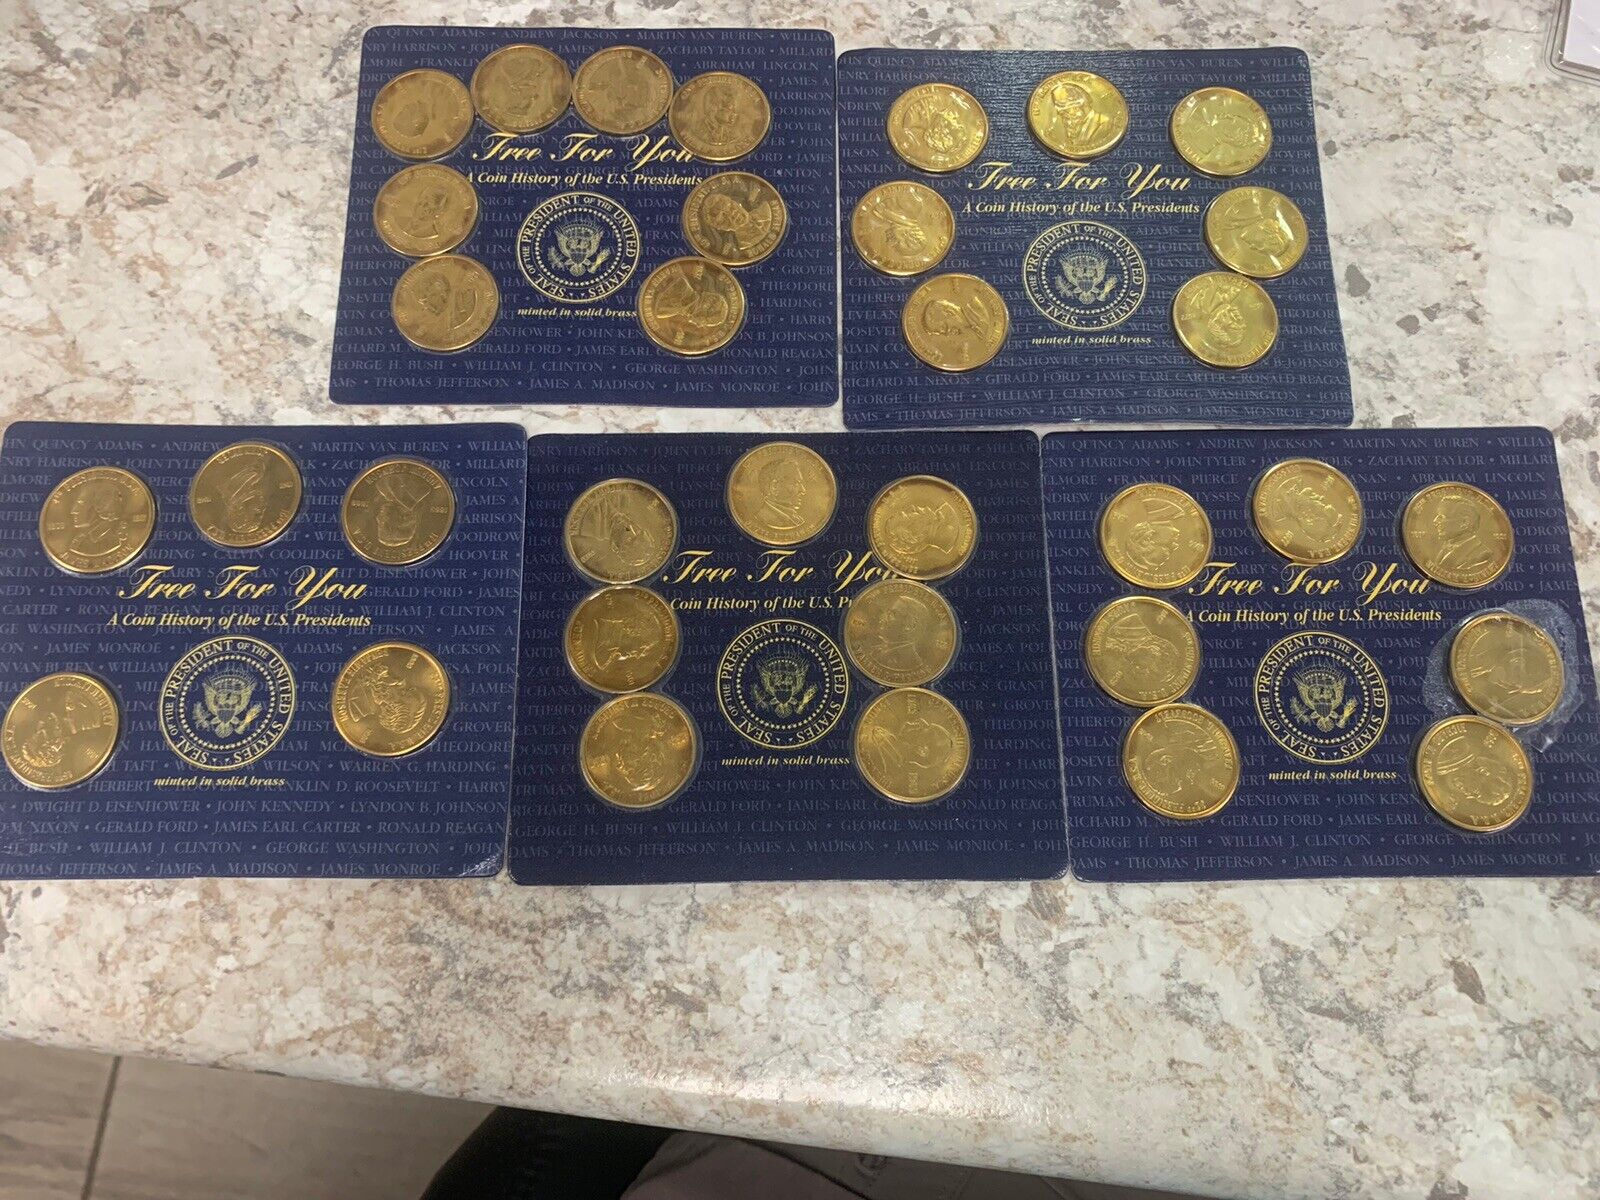 5 SEALED Free For You A Coin History of the U.S. Presidents Brass Coin Sets